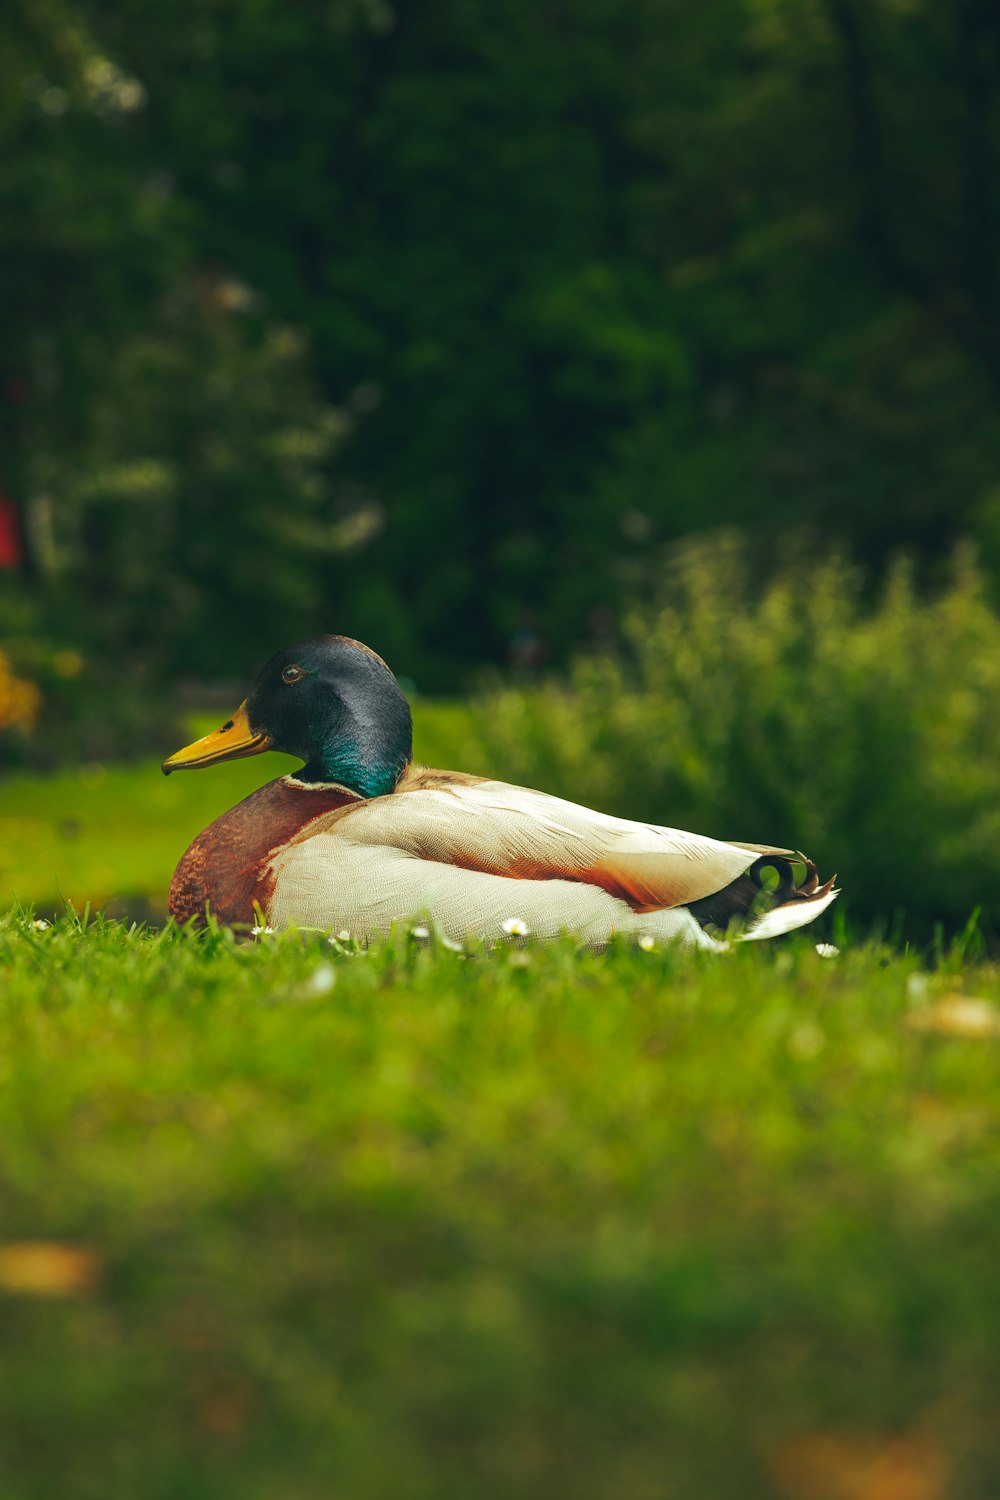 a duck sitting in the grass in a park